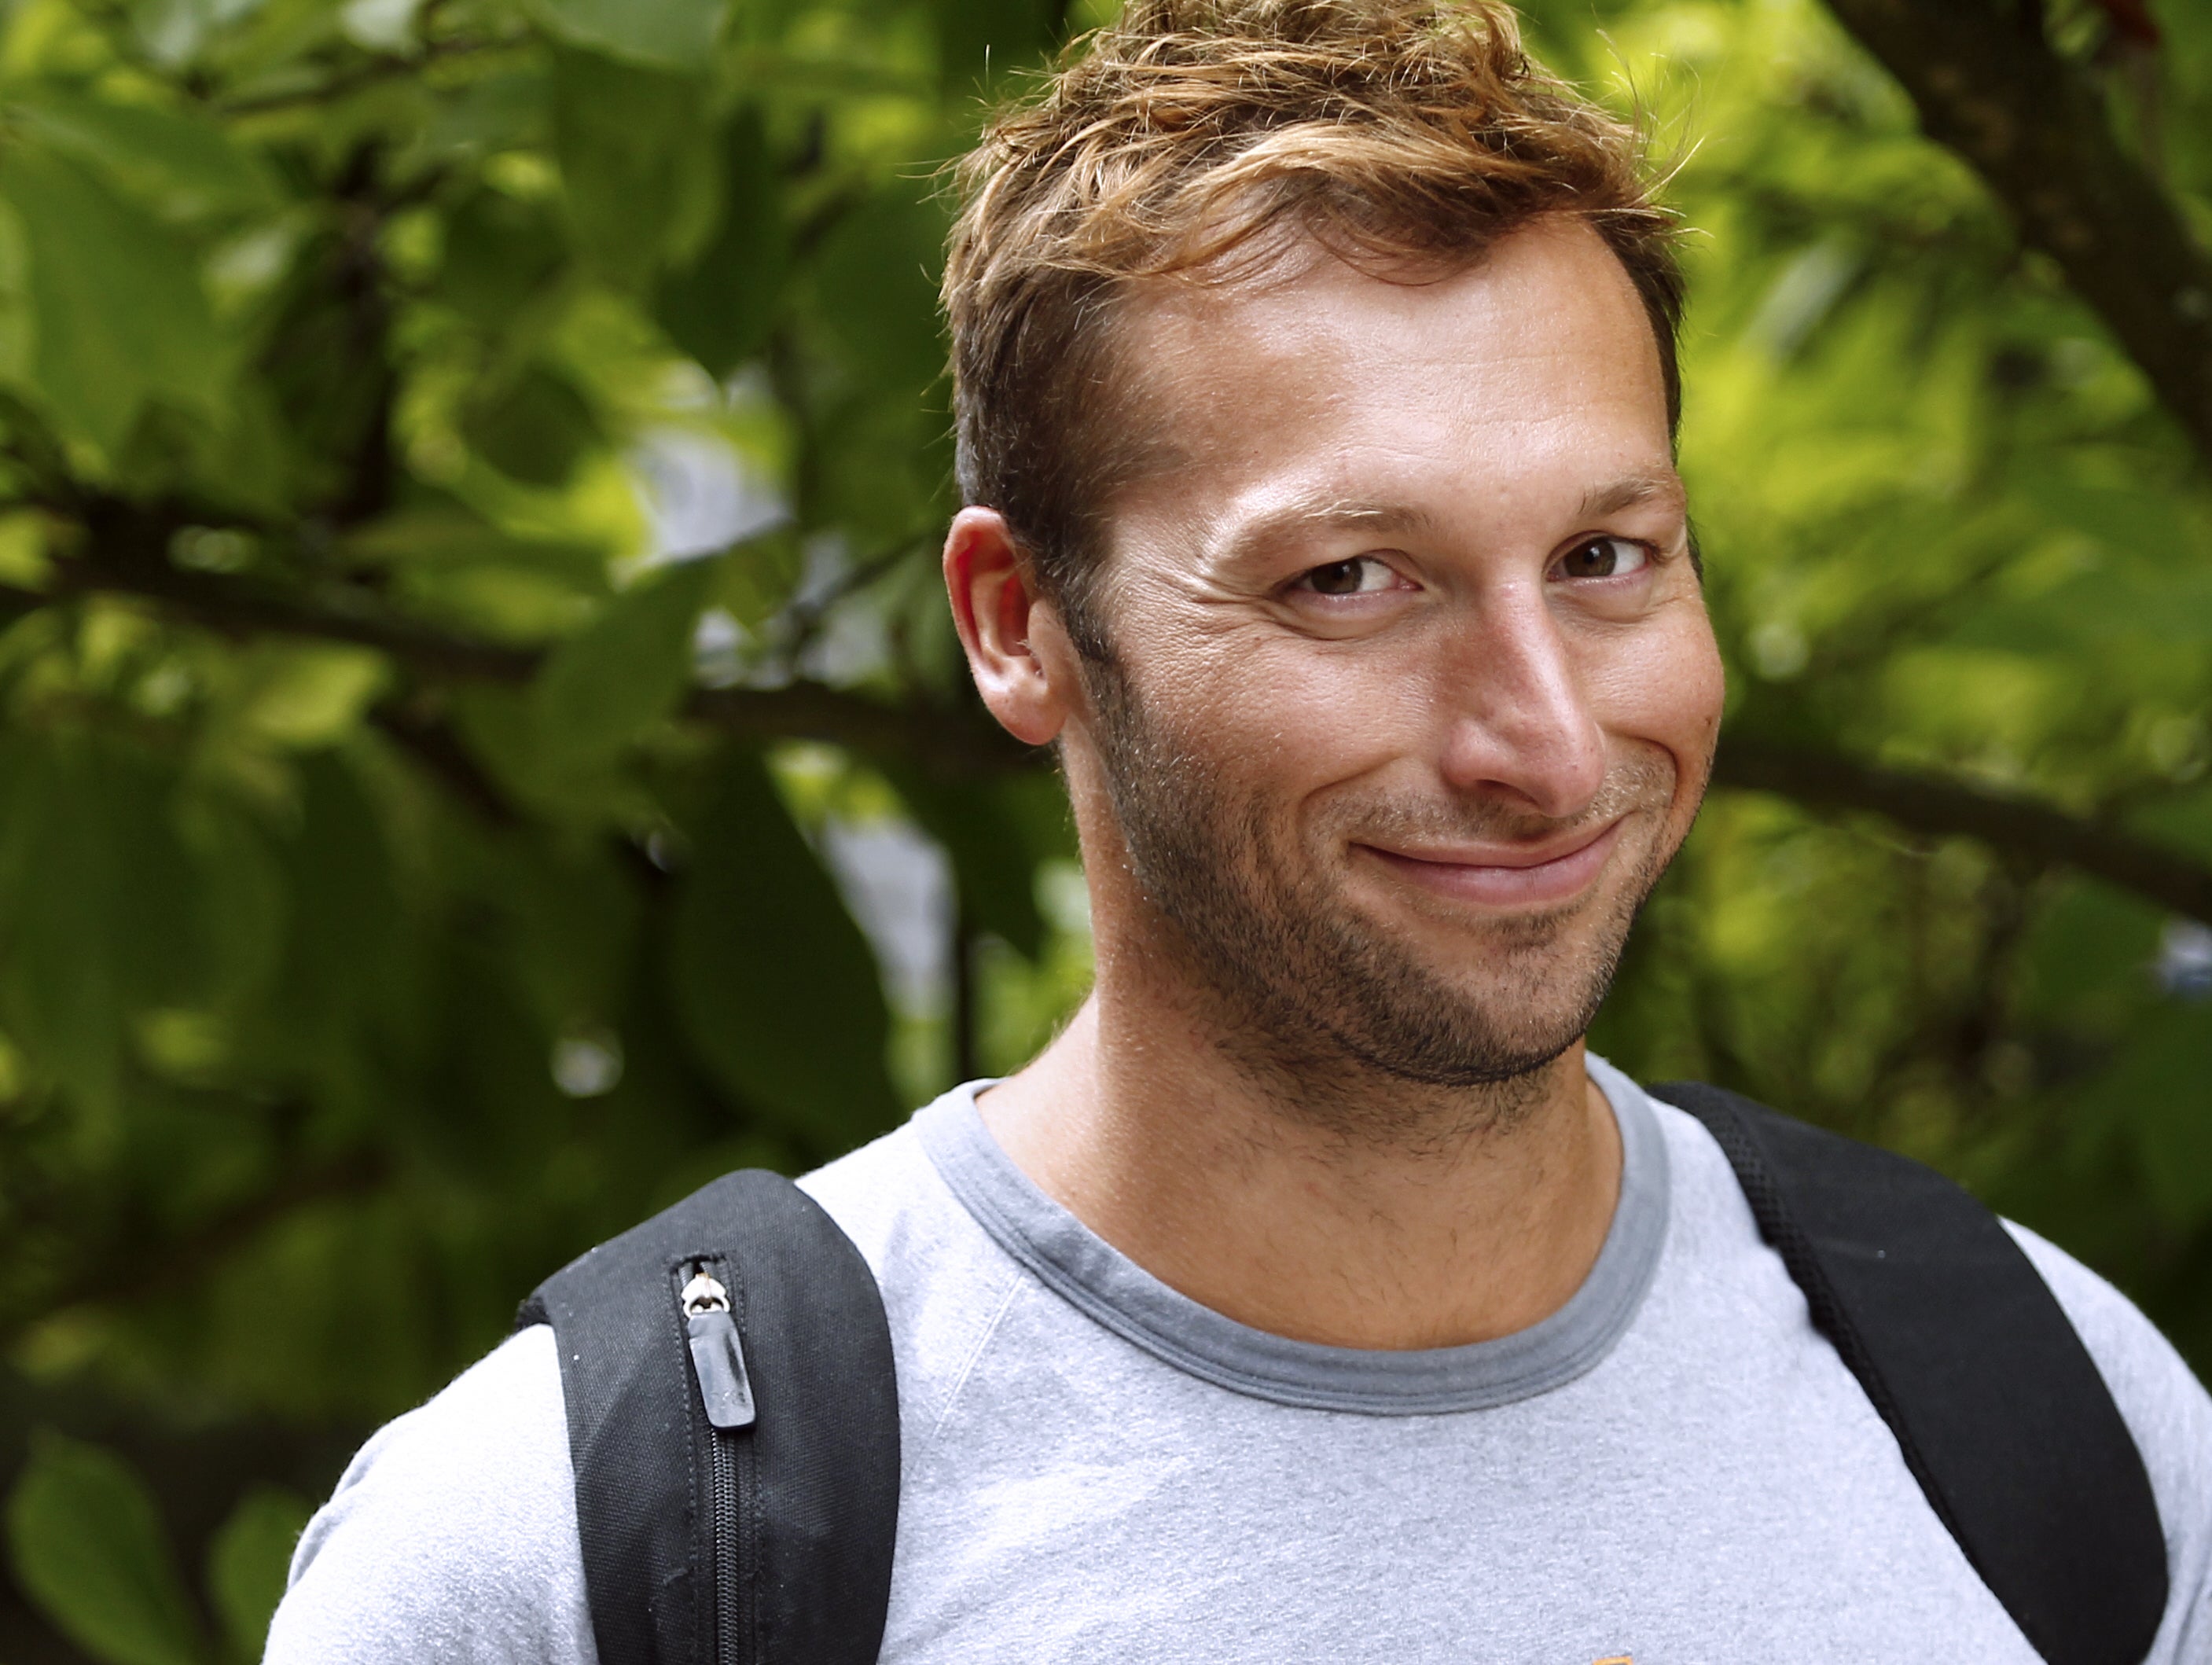 Ian Thorpe has thanked his supporters after the athlete said in an interview that he is gay